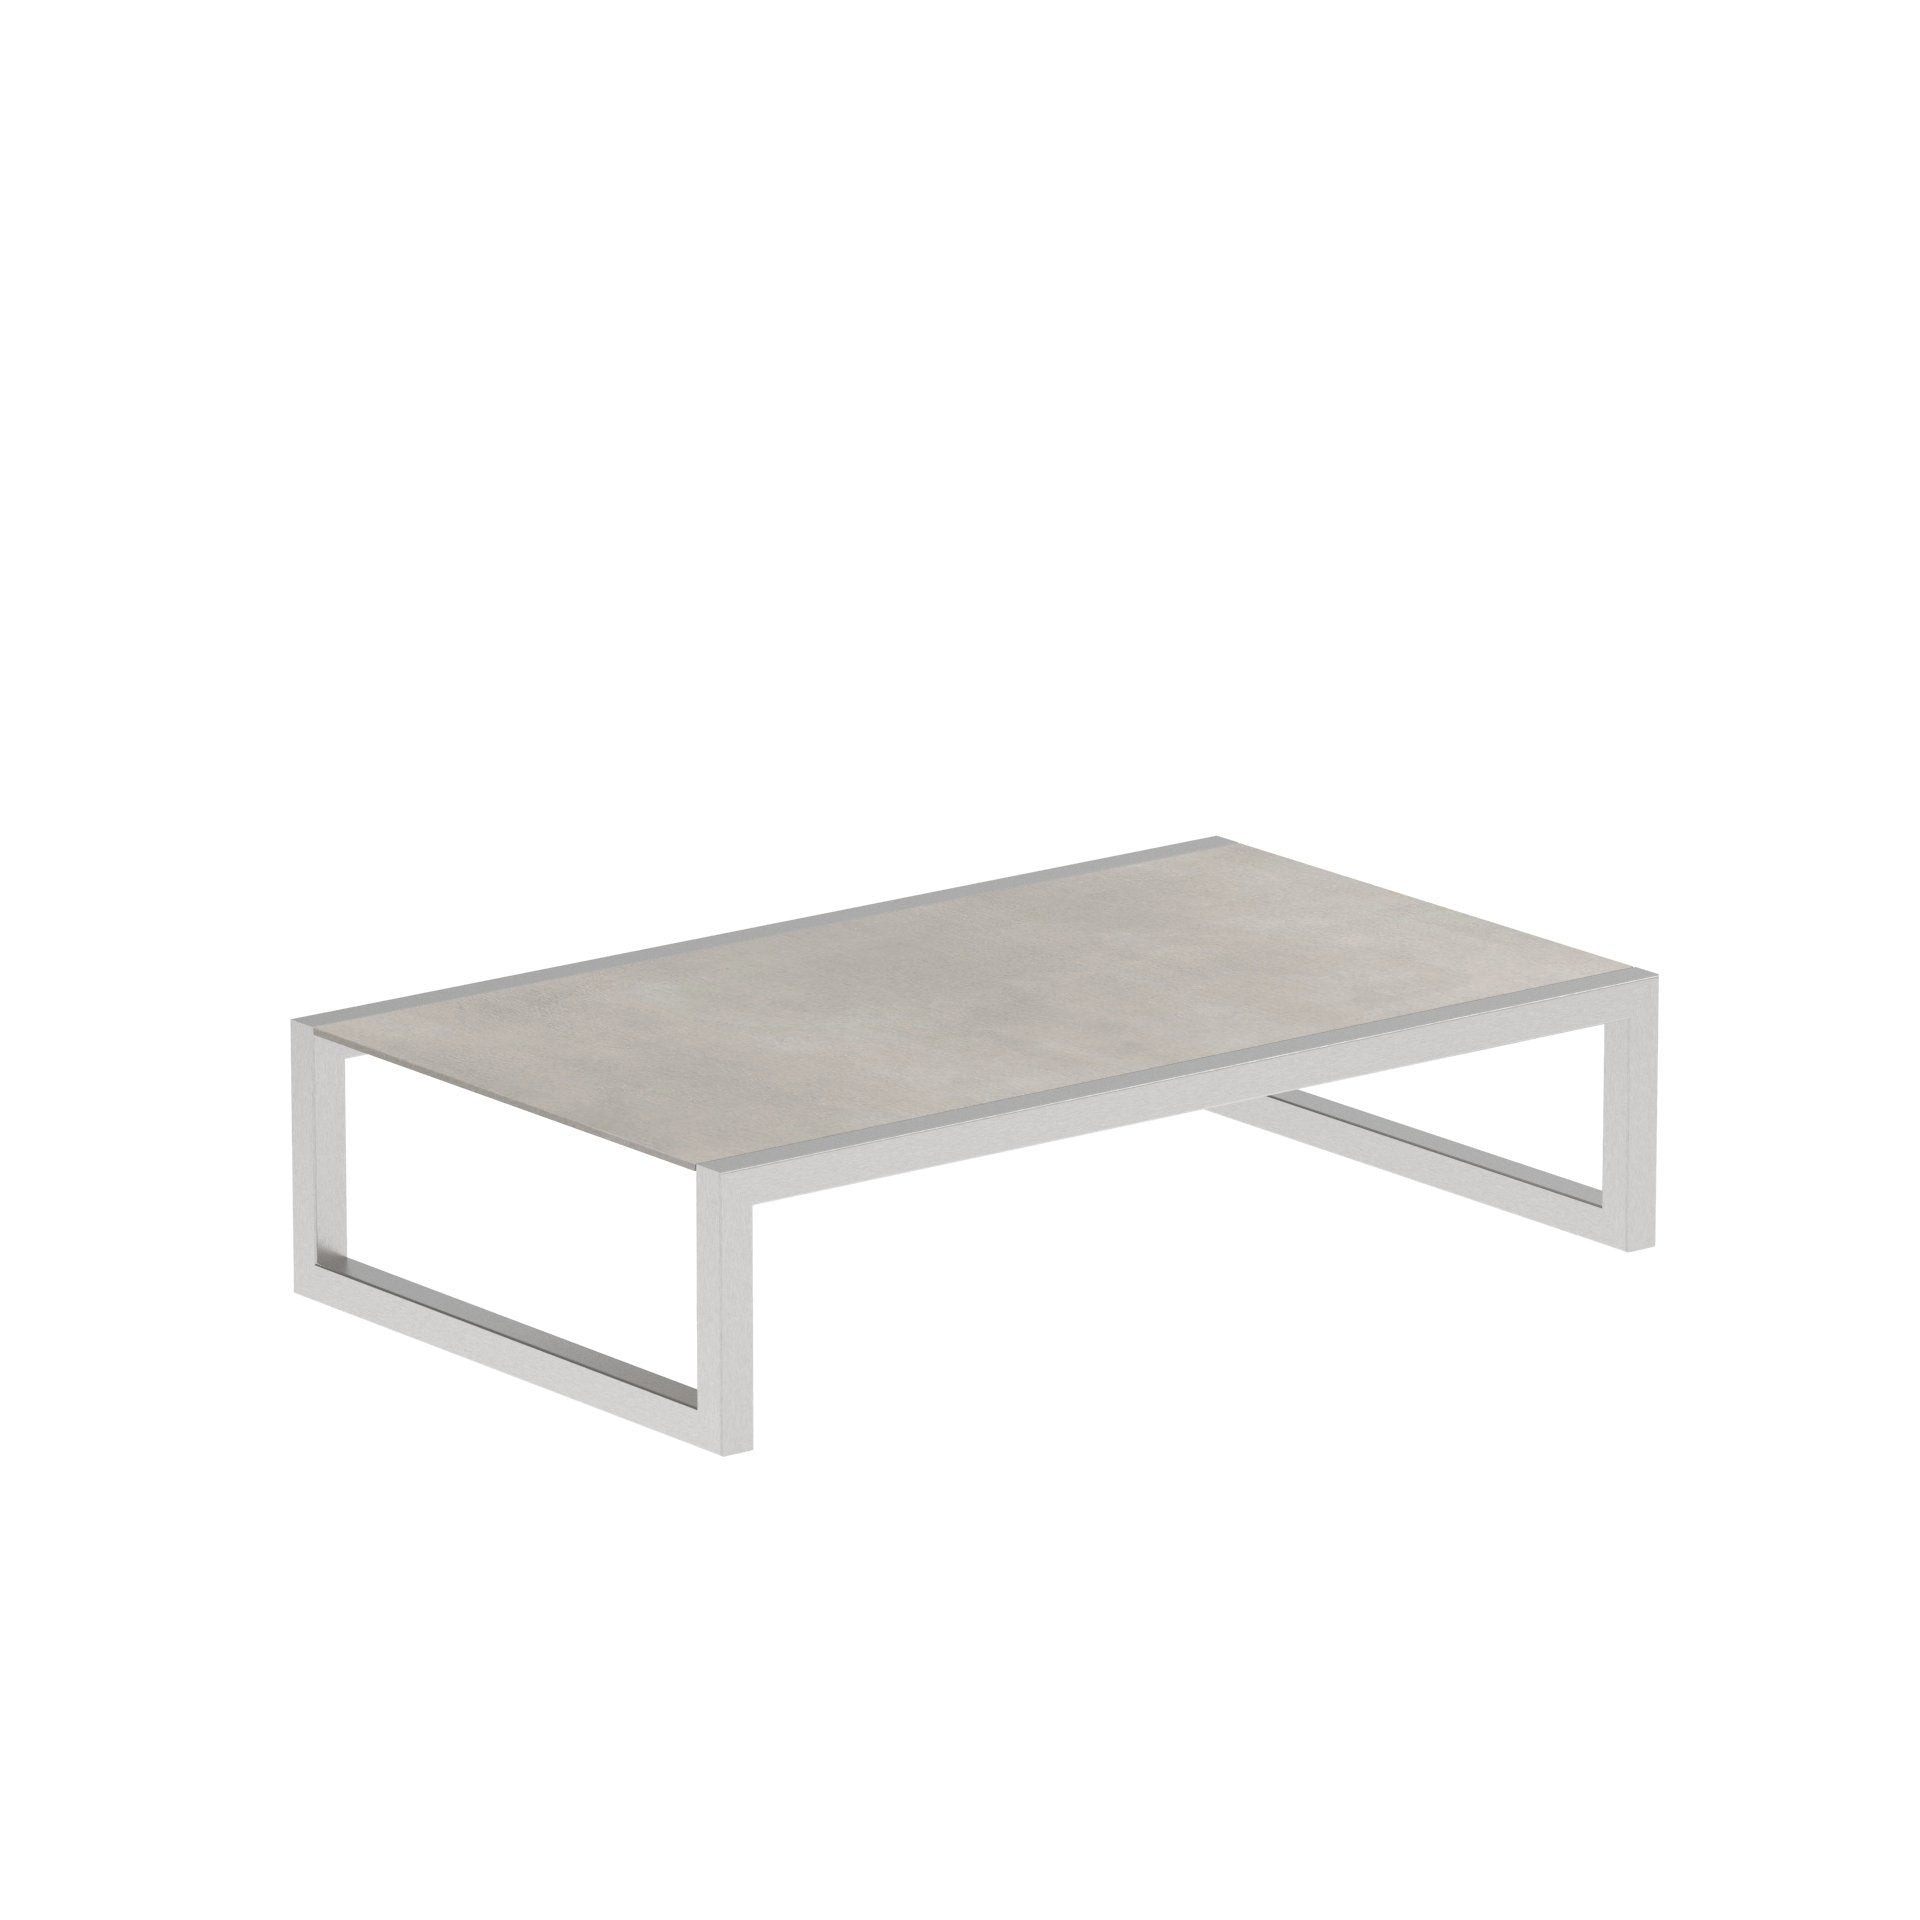 Ninix Low Table for outdoors